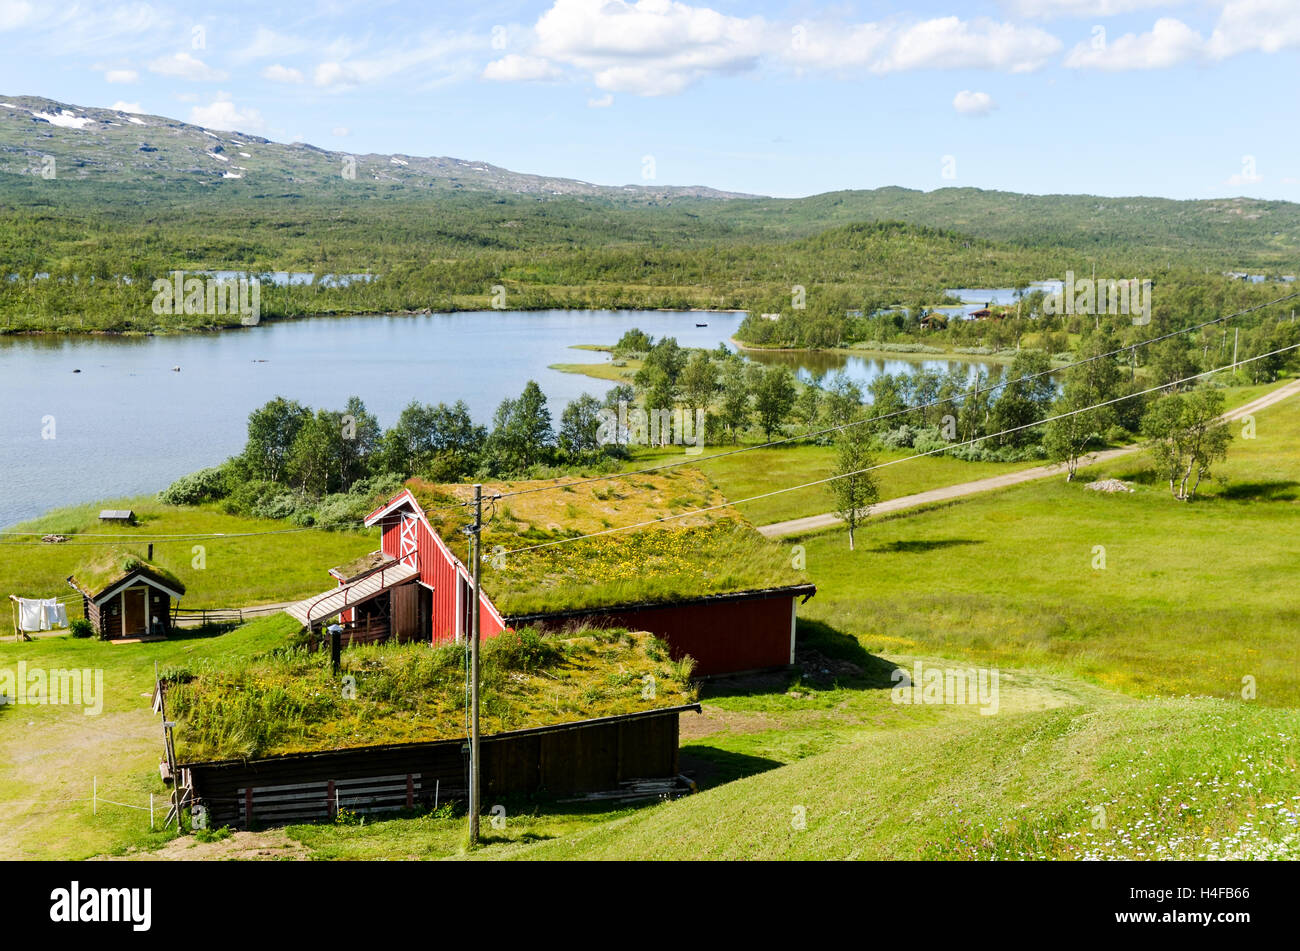 Farmstead house in Northern Norway outdoors, lakes and mountains Stock Photo